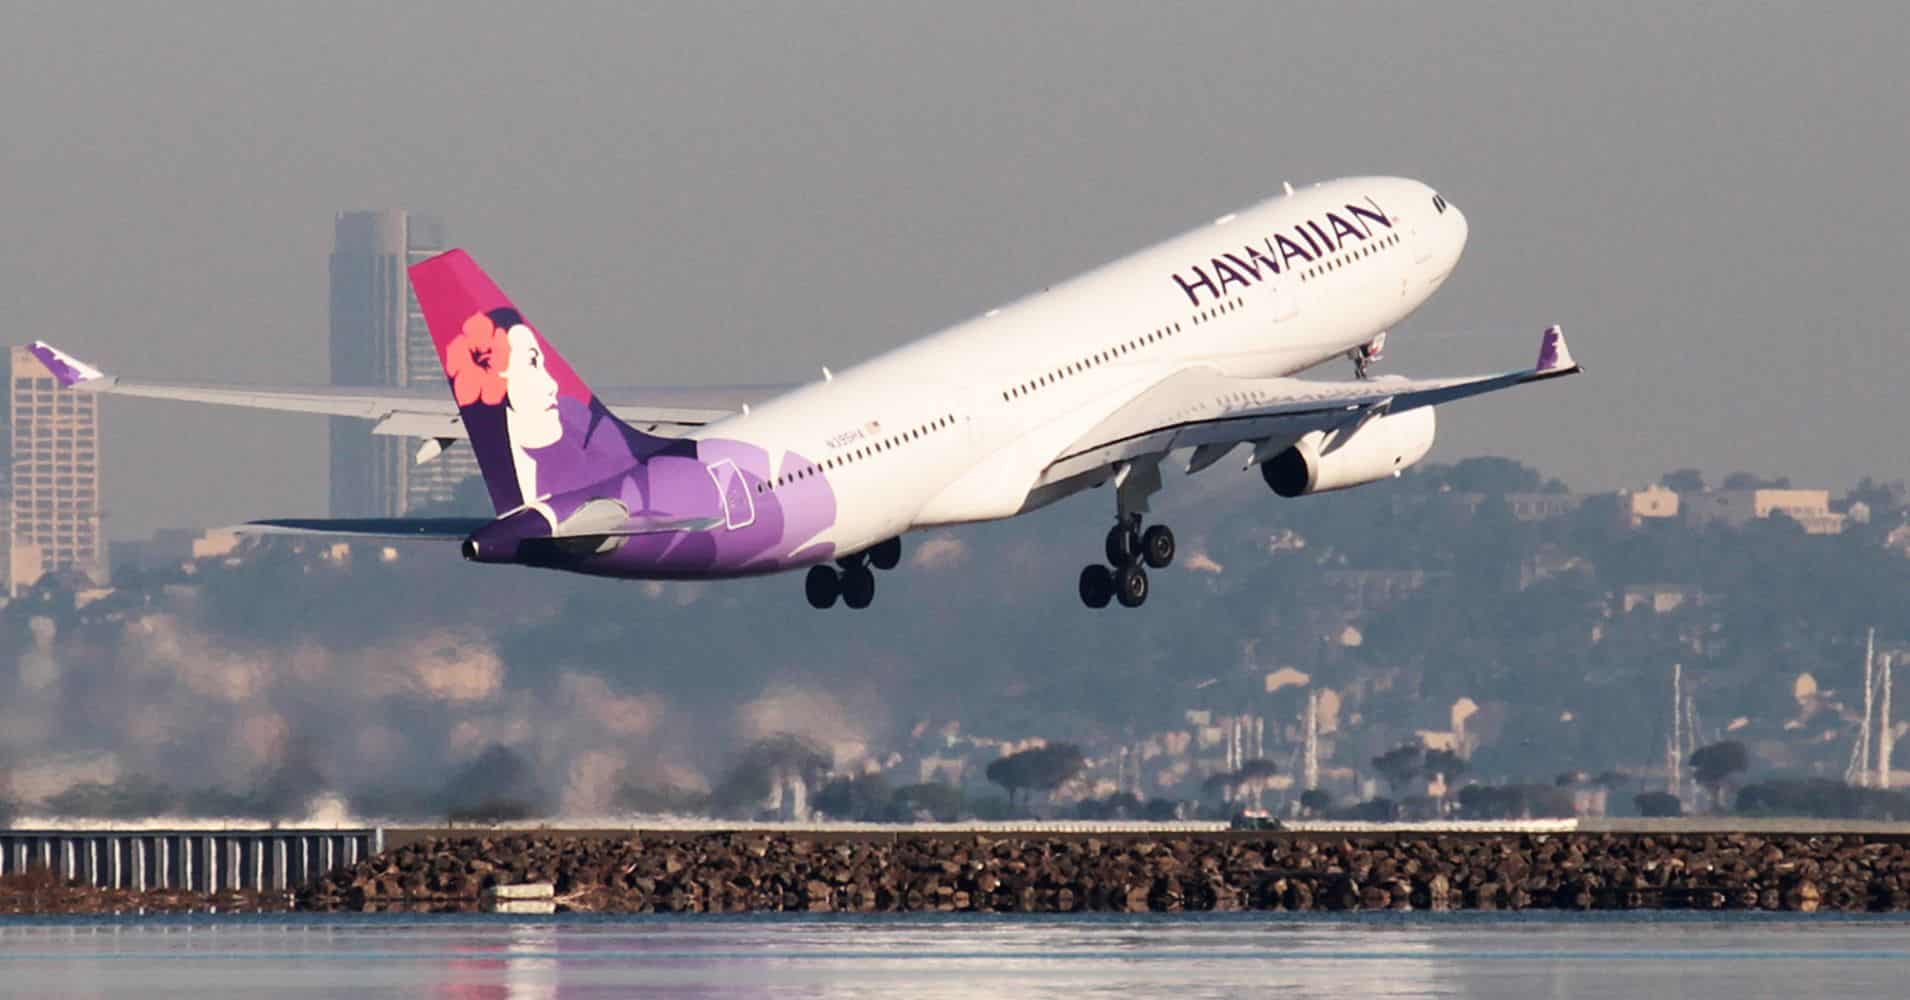 This will be the new longest nonstop flight in America